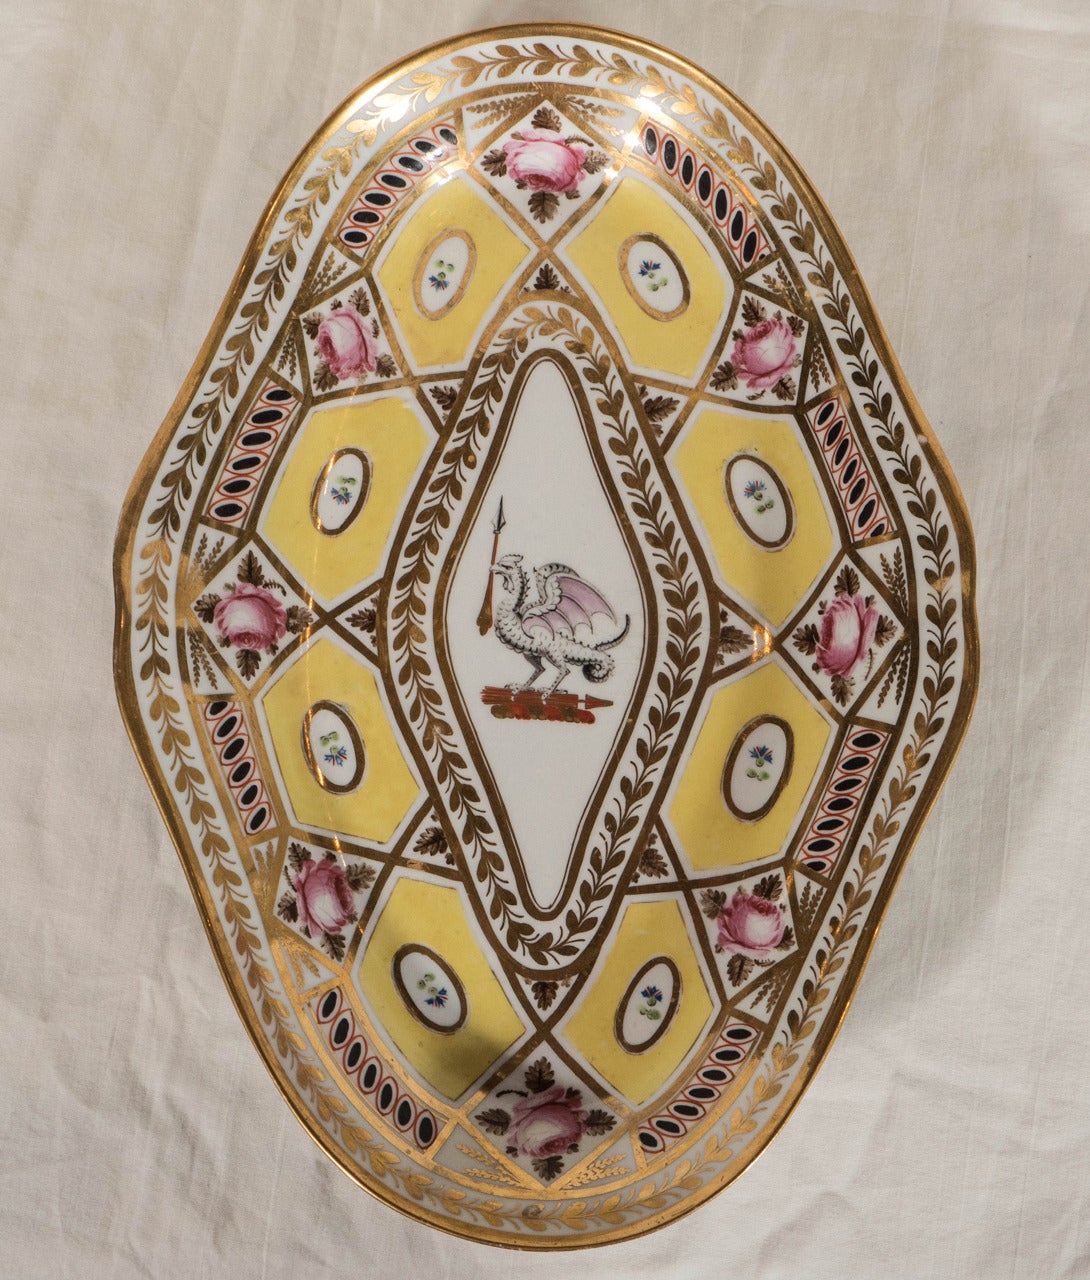 A pair of Regency period Coalport dishes in the remarkable Church Gresley pattern decorated with yellow ground hexagons, pink roses, green leaves, and exceptional gilding, all surrounding a central crest with a mythical beast. 
The crest as